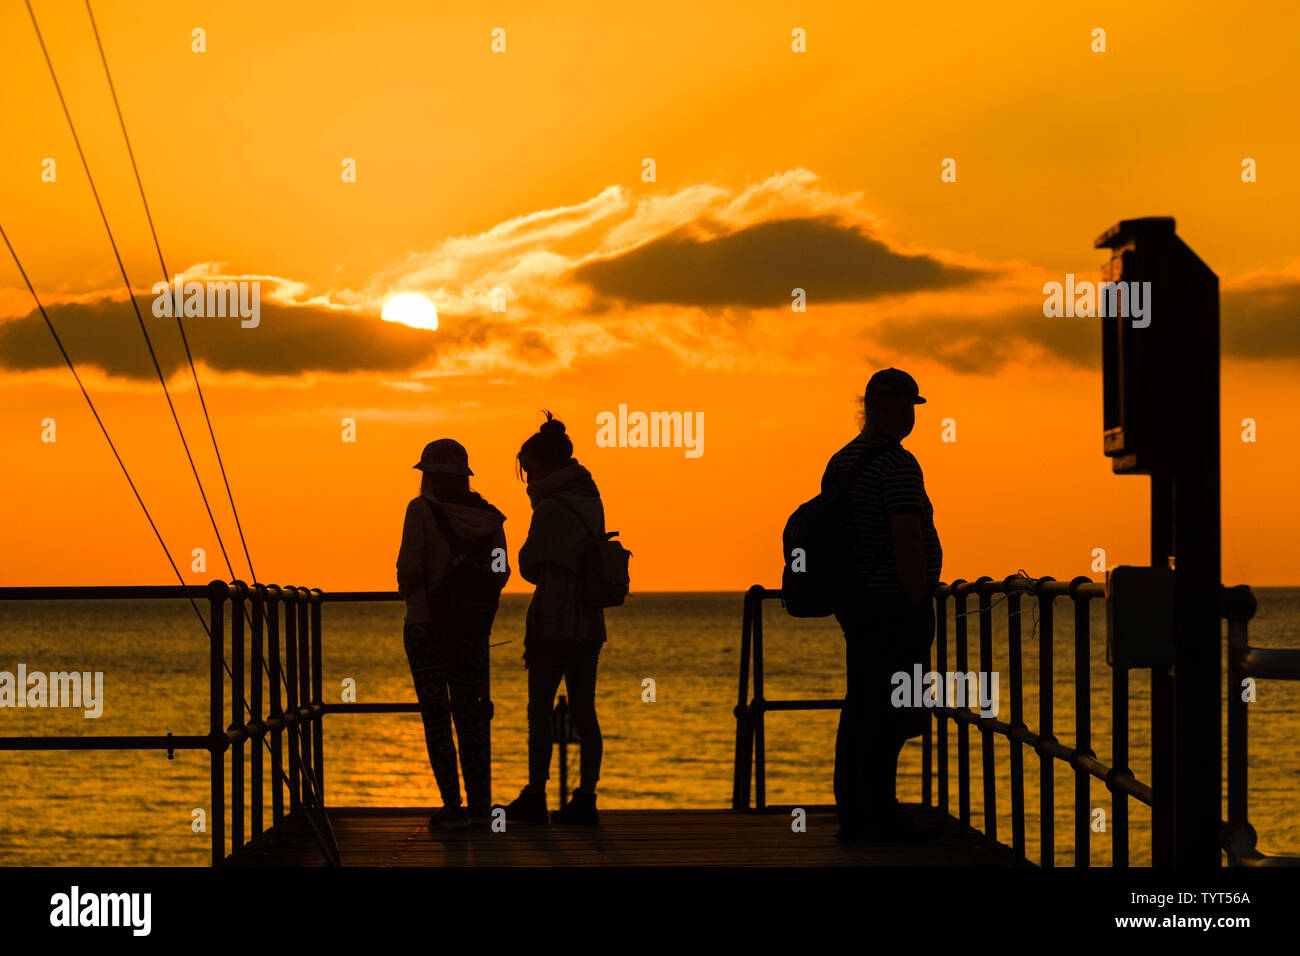 Aberystwyth Wales UK, Wednesday   26 June 2019  UK Weather: People  on the pier watching the glorious sunset in Aberystwyth on the Cardigan Bay coast, west Wales, as the country heads into a spell of fine weather and the hottest days of the summer so far,  with temperatures expected to reach the high 20’s centigrade   photo credit: Keith Morris/Alamy Live News Stock Photo